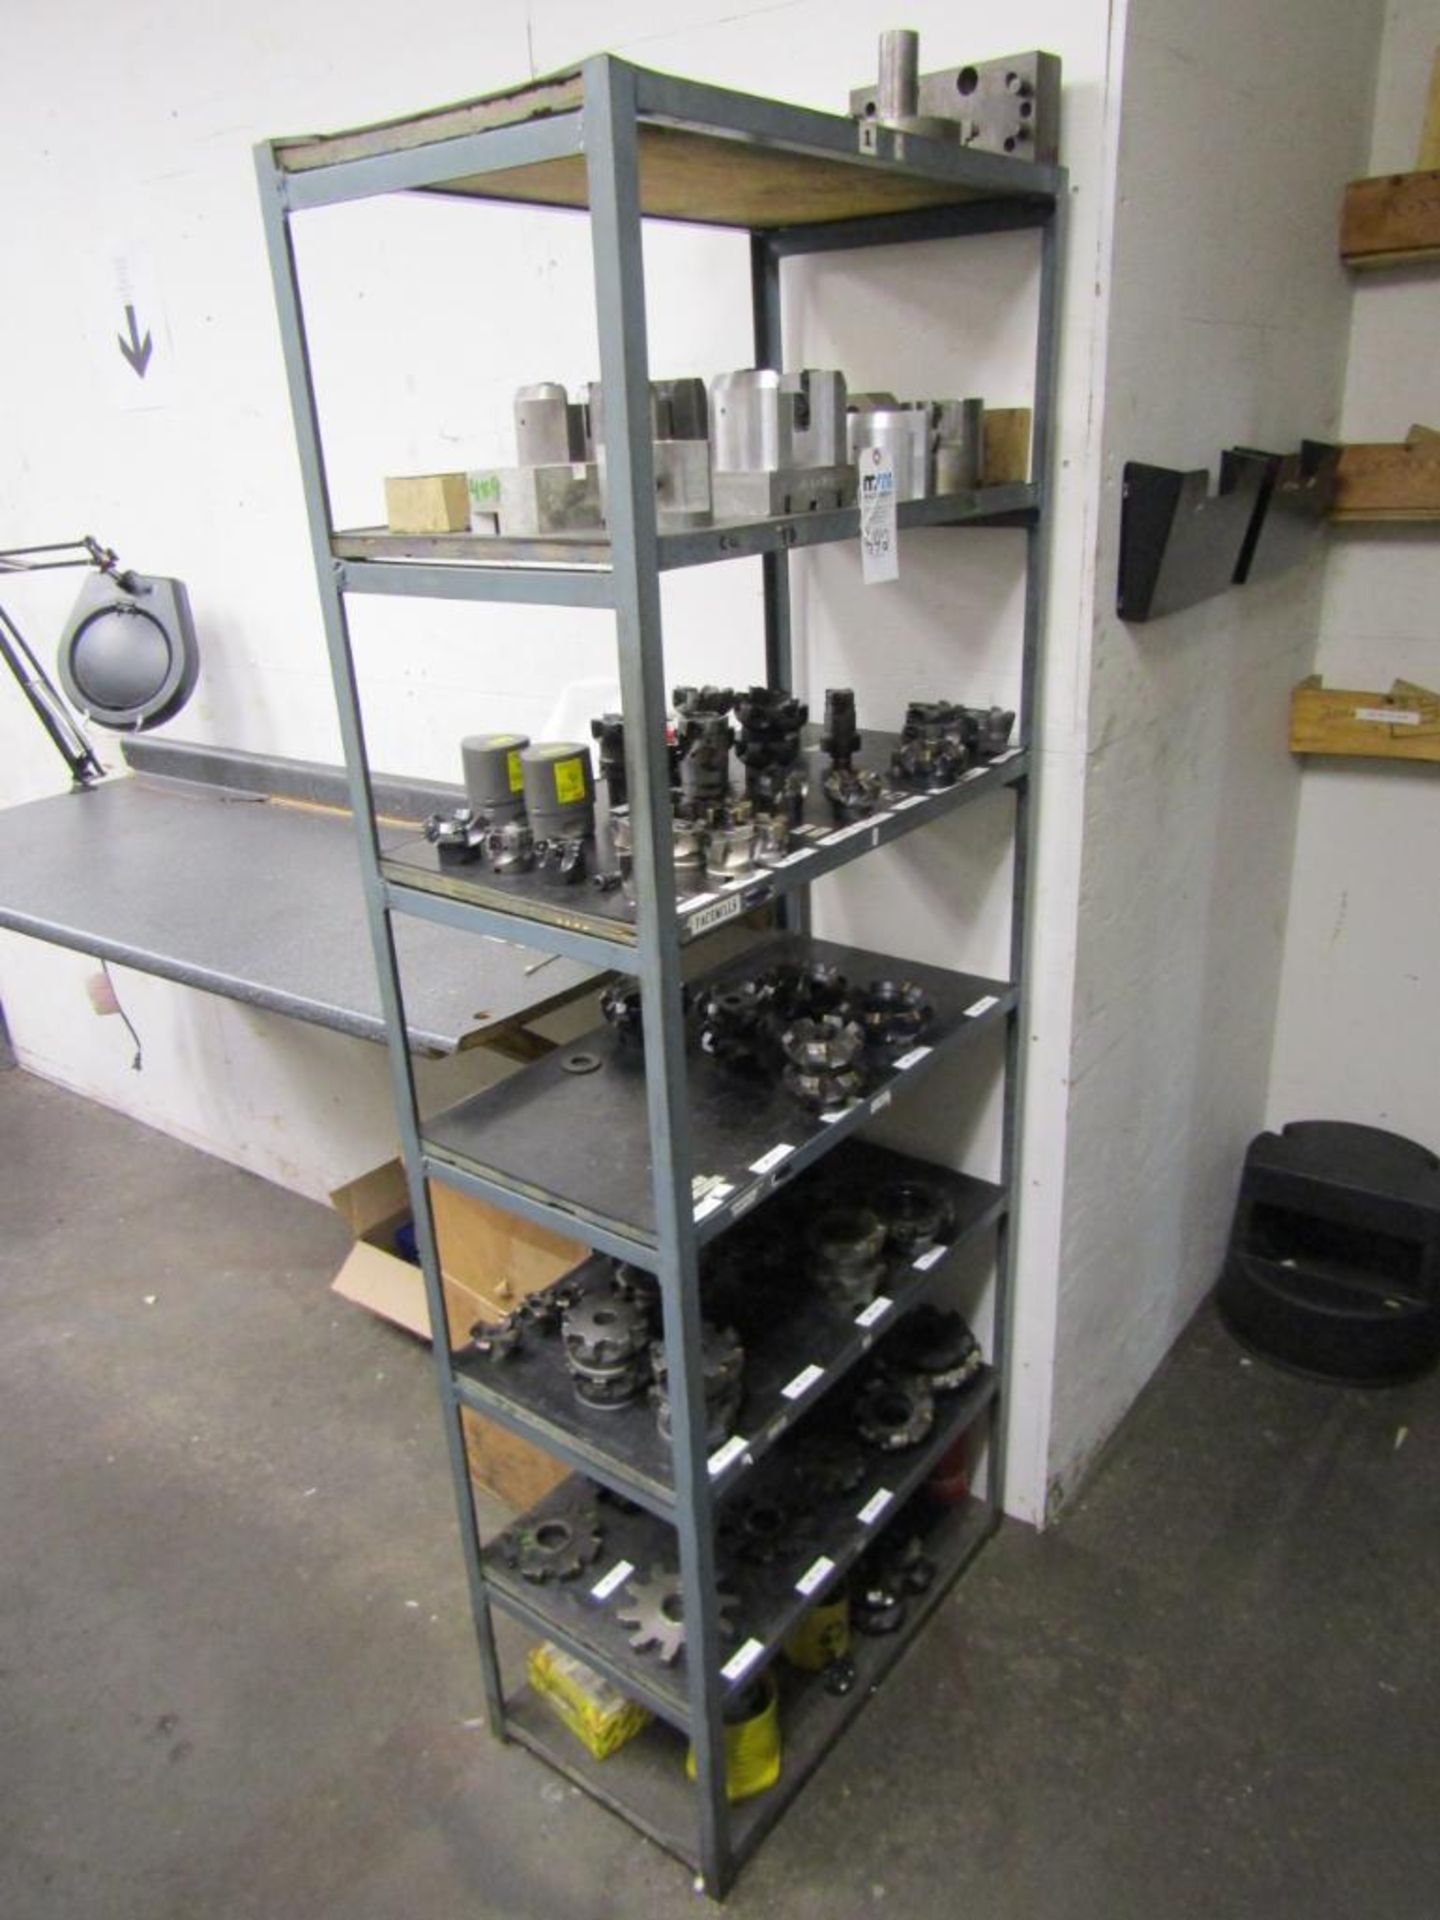 7-Tier Steel Frame Shelving Unit; 28.5" x 15" x 73", with Contents of Shell Mills, Side Cutters, Cus